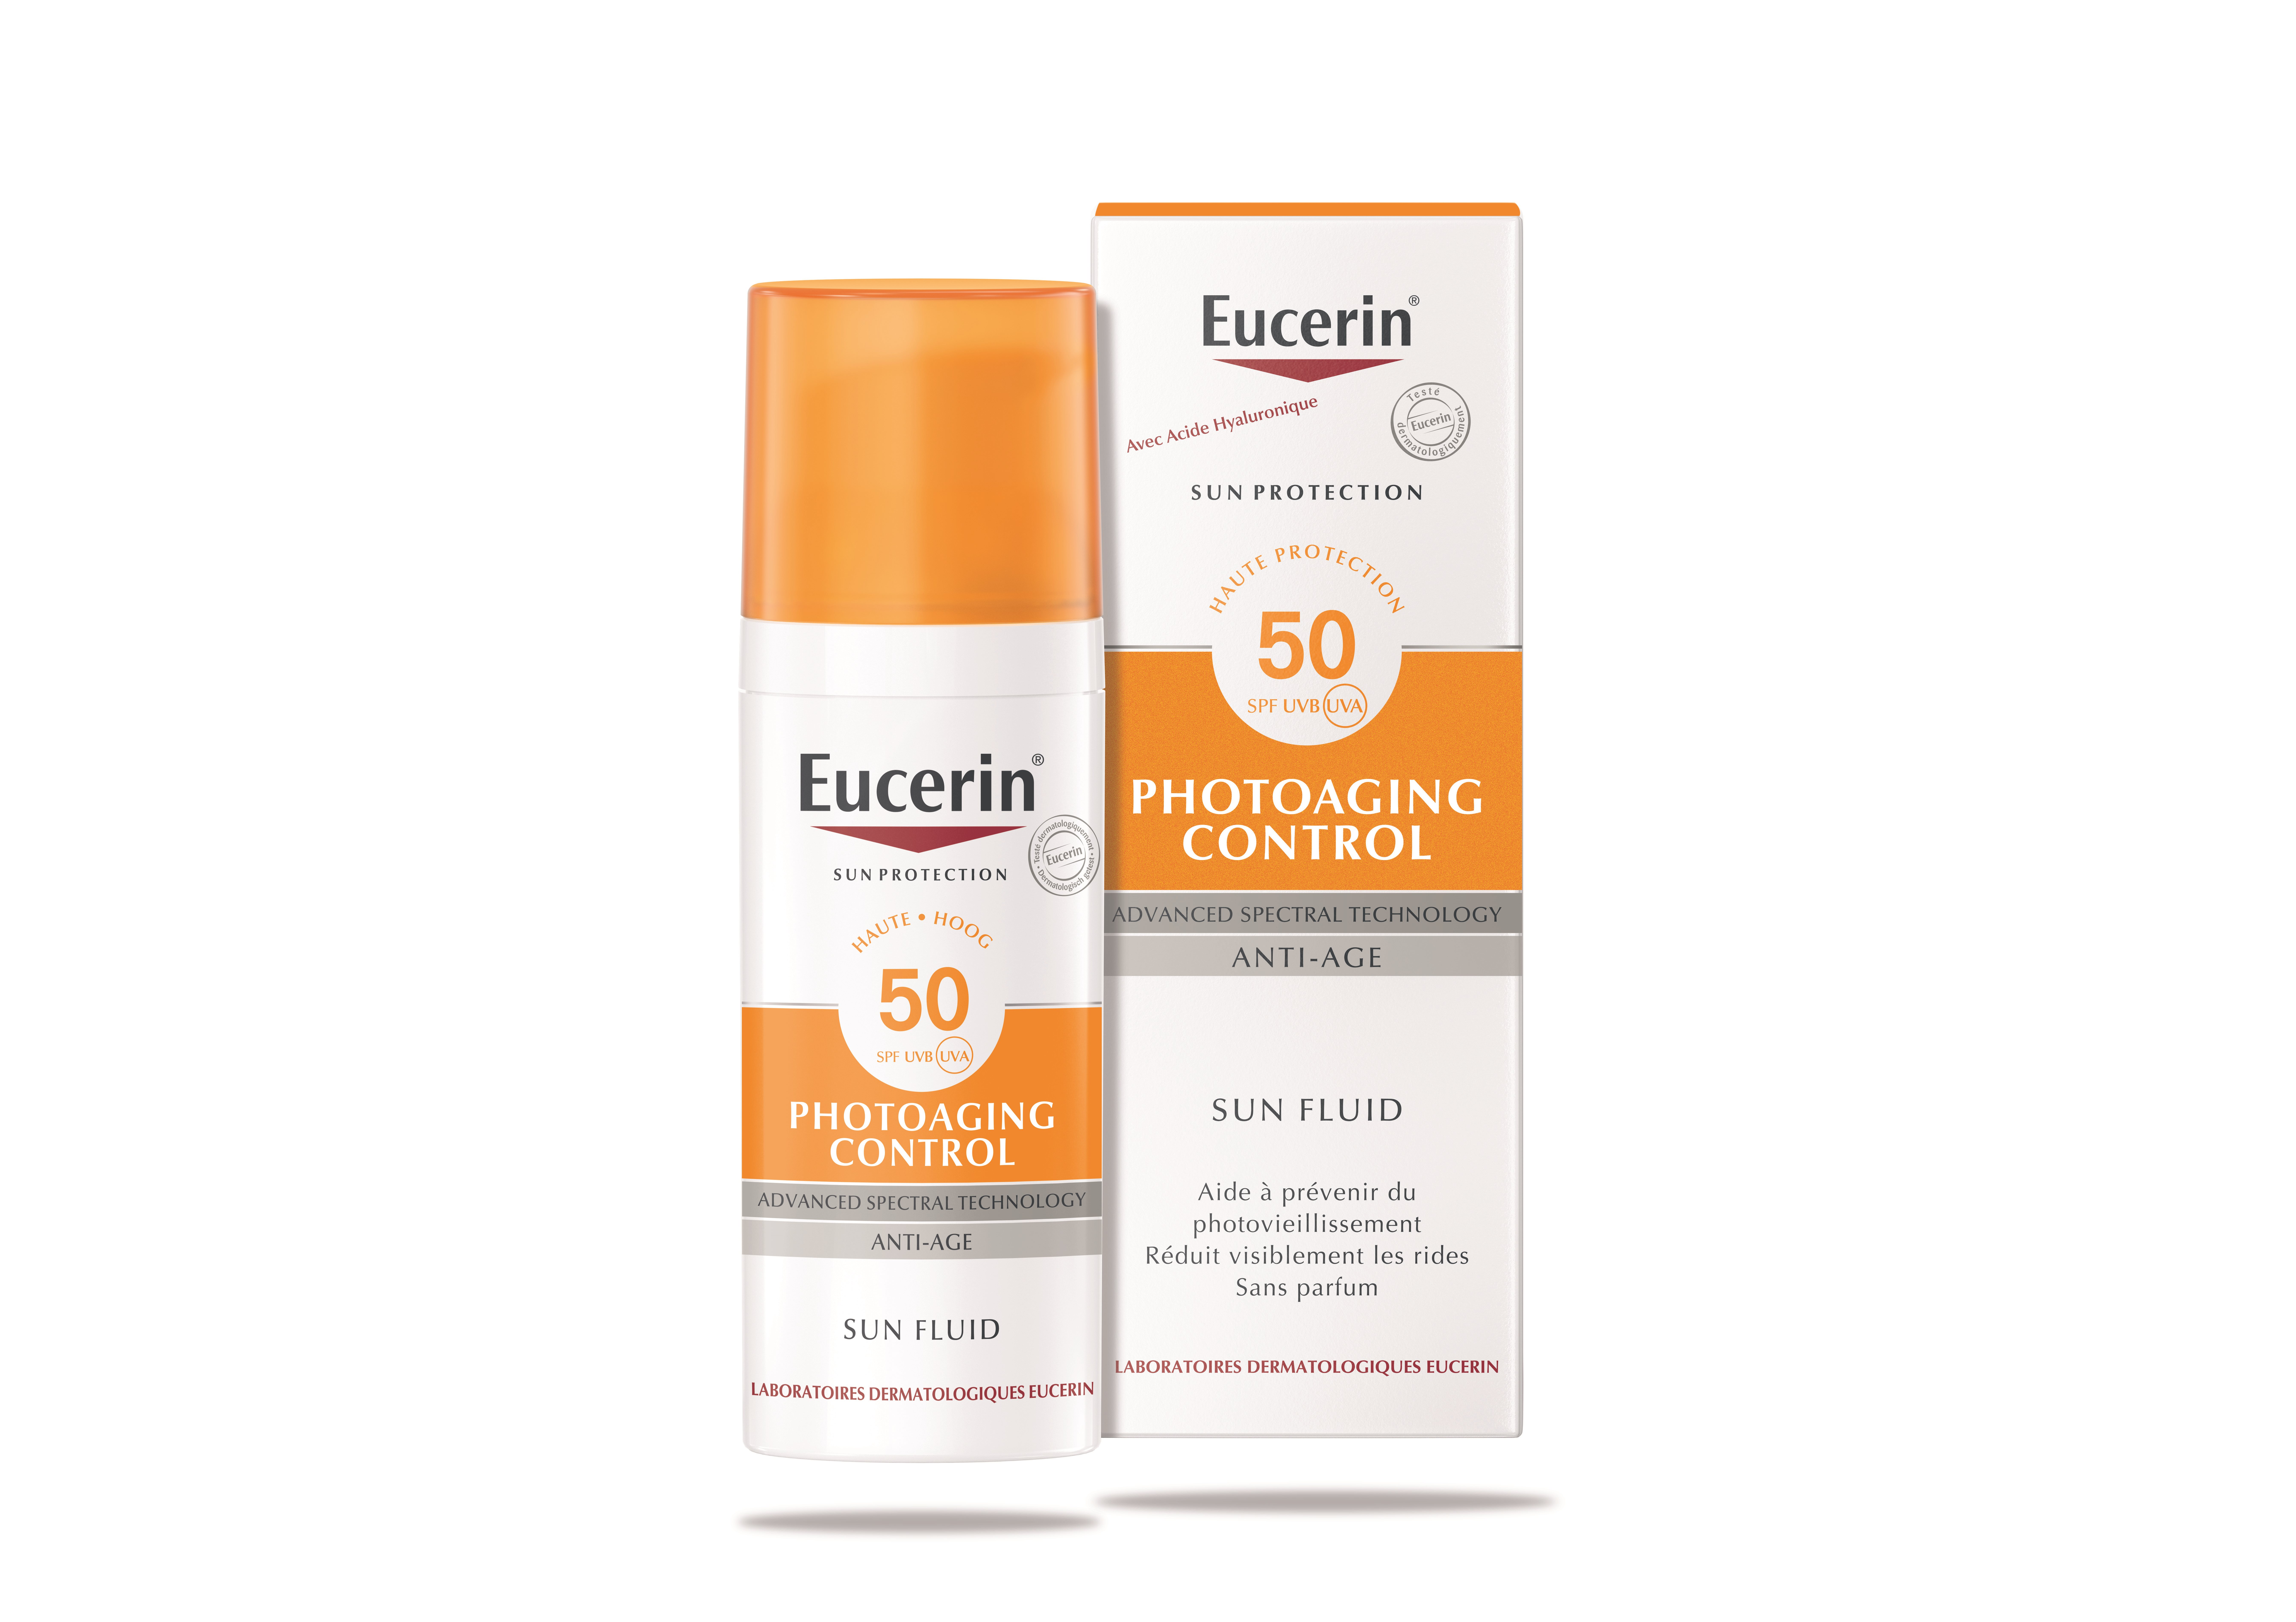 Sun protection with Hyaluronic Acid